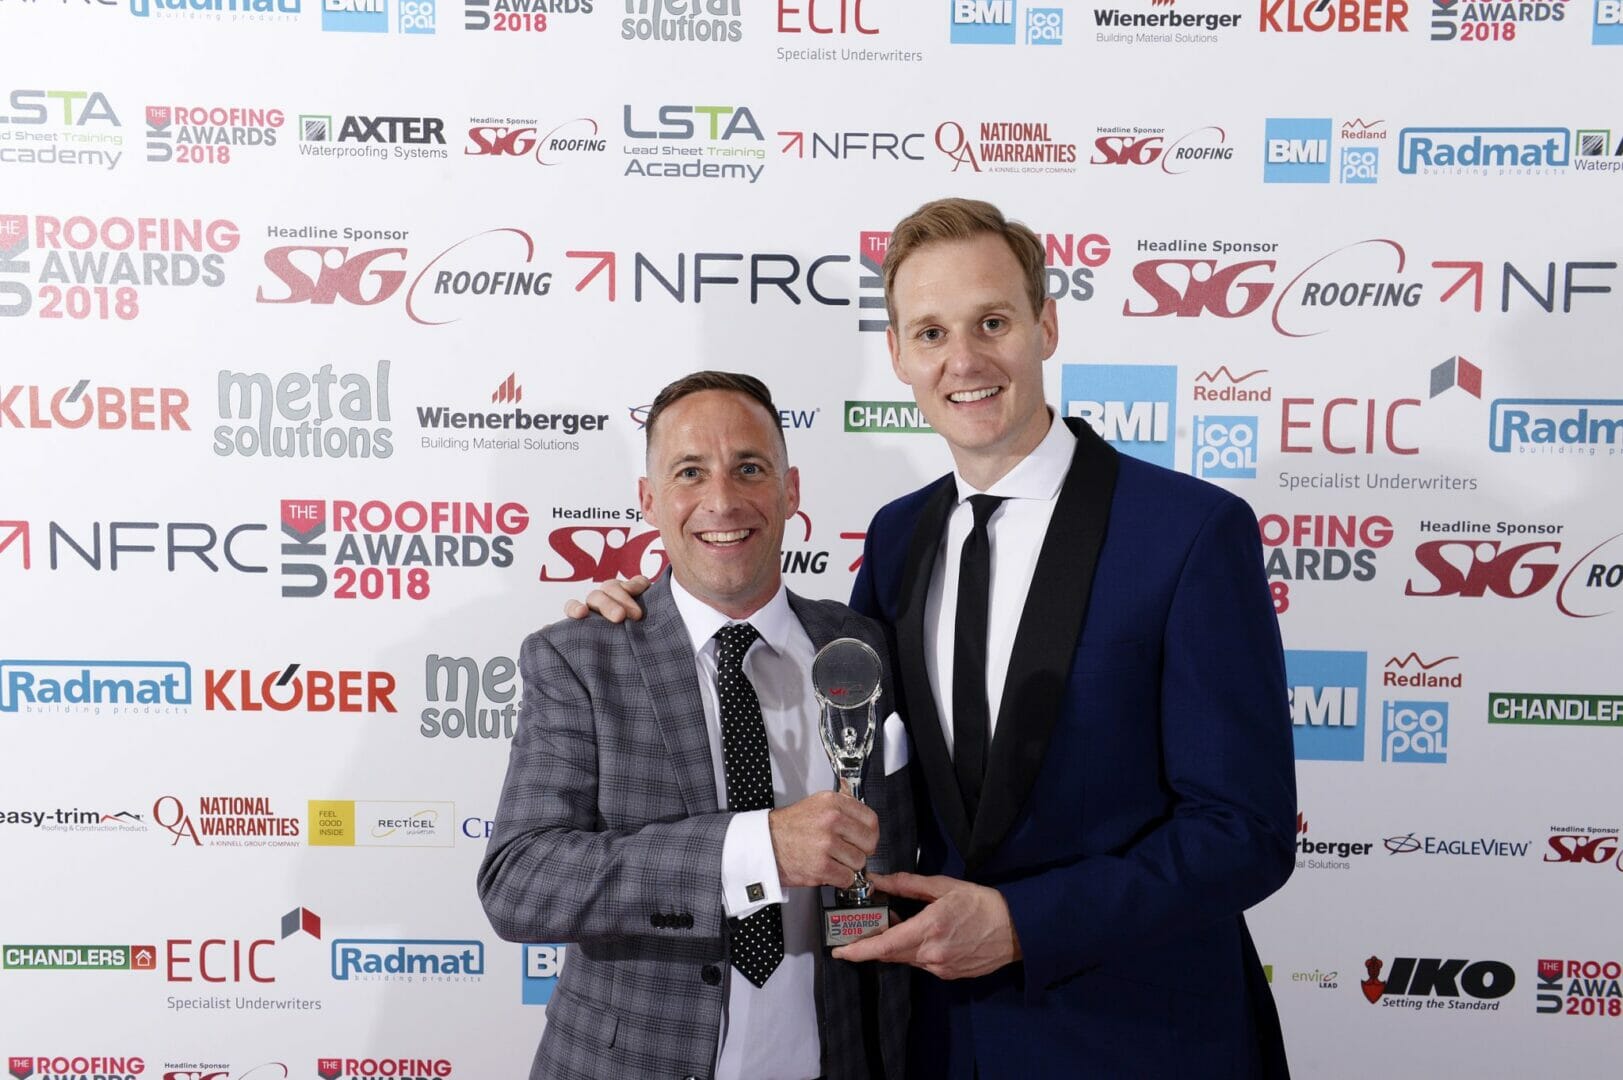 Charity-minded Farnham roofer crowned nation’s ‘Local Hero’ in the 2018 UK Roofing Awards @SIGRoofing @TheNFRC